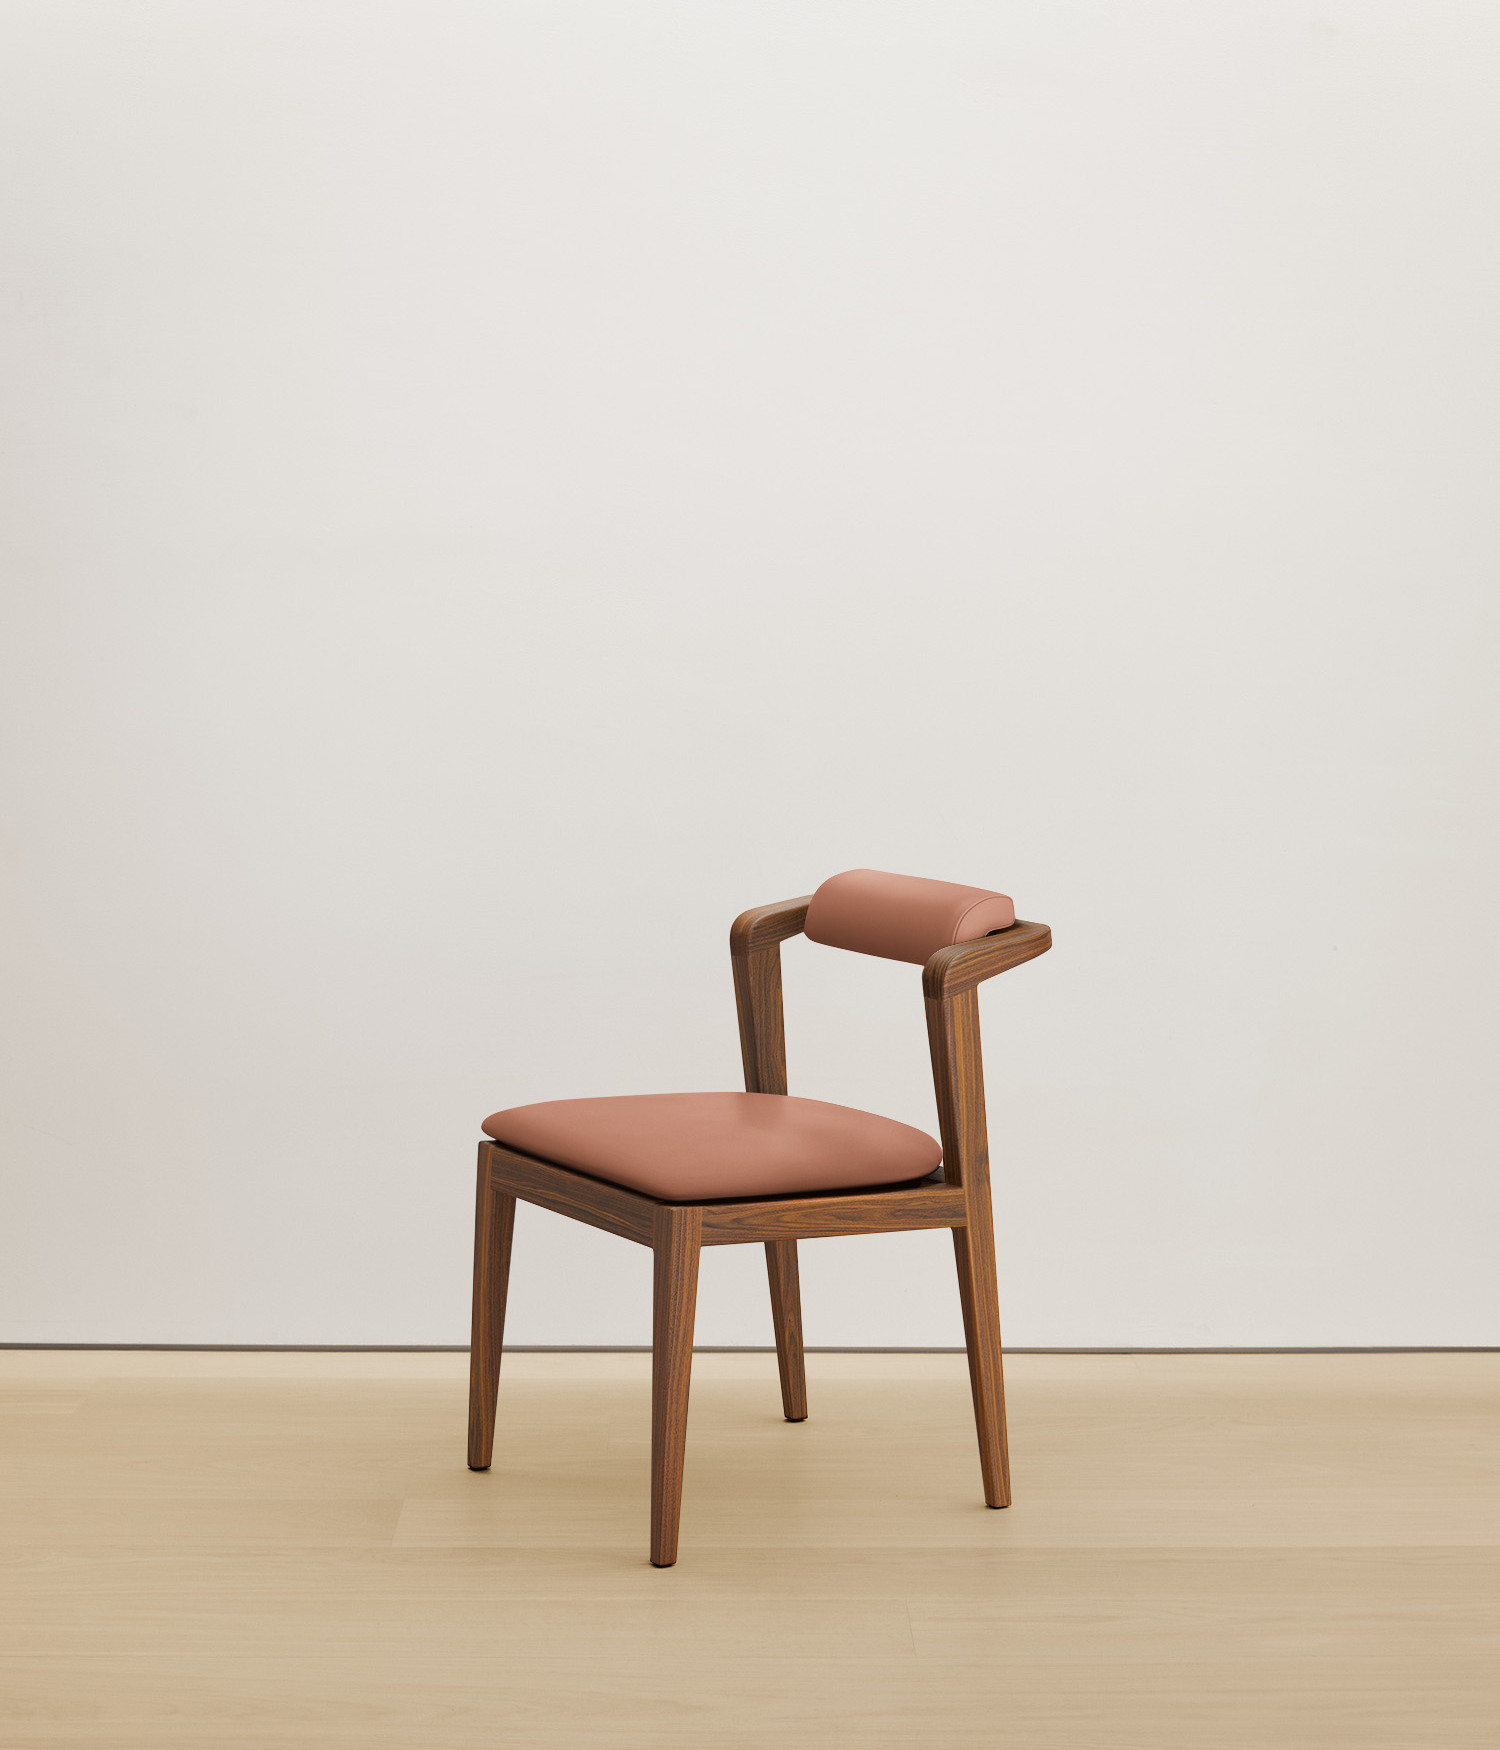  walnut chair with clay color upholstered seat